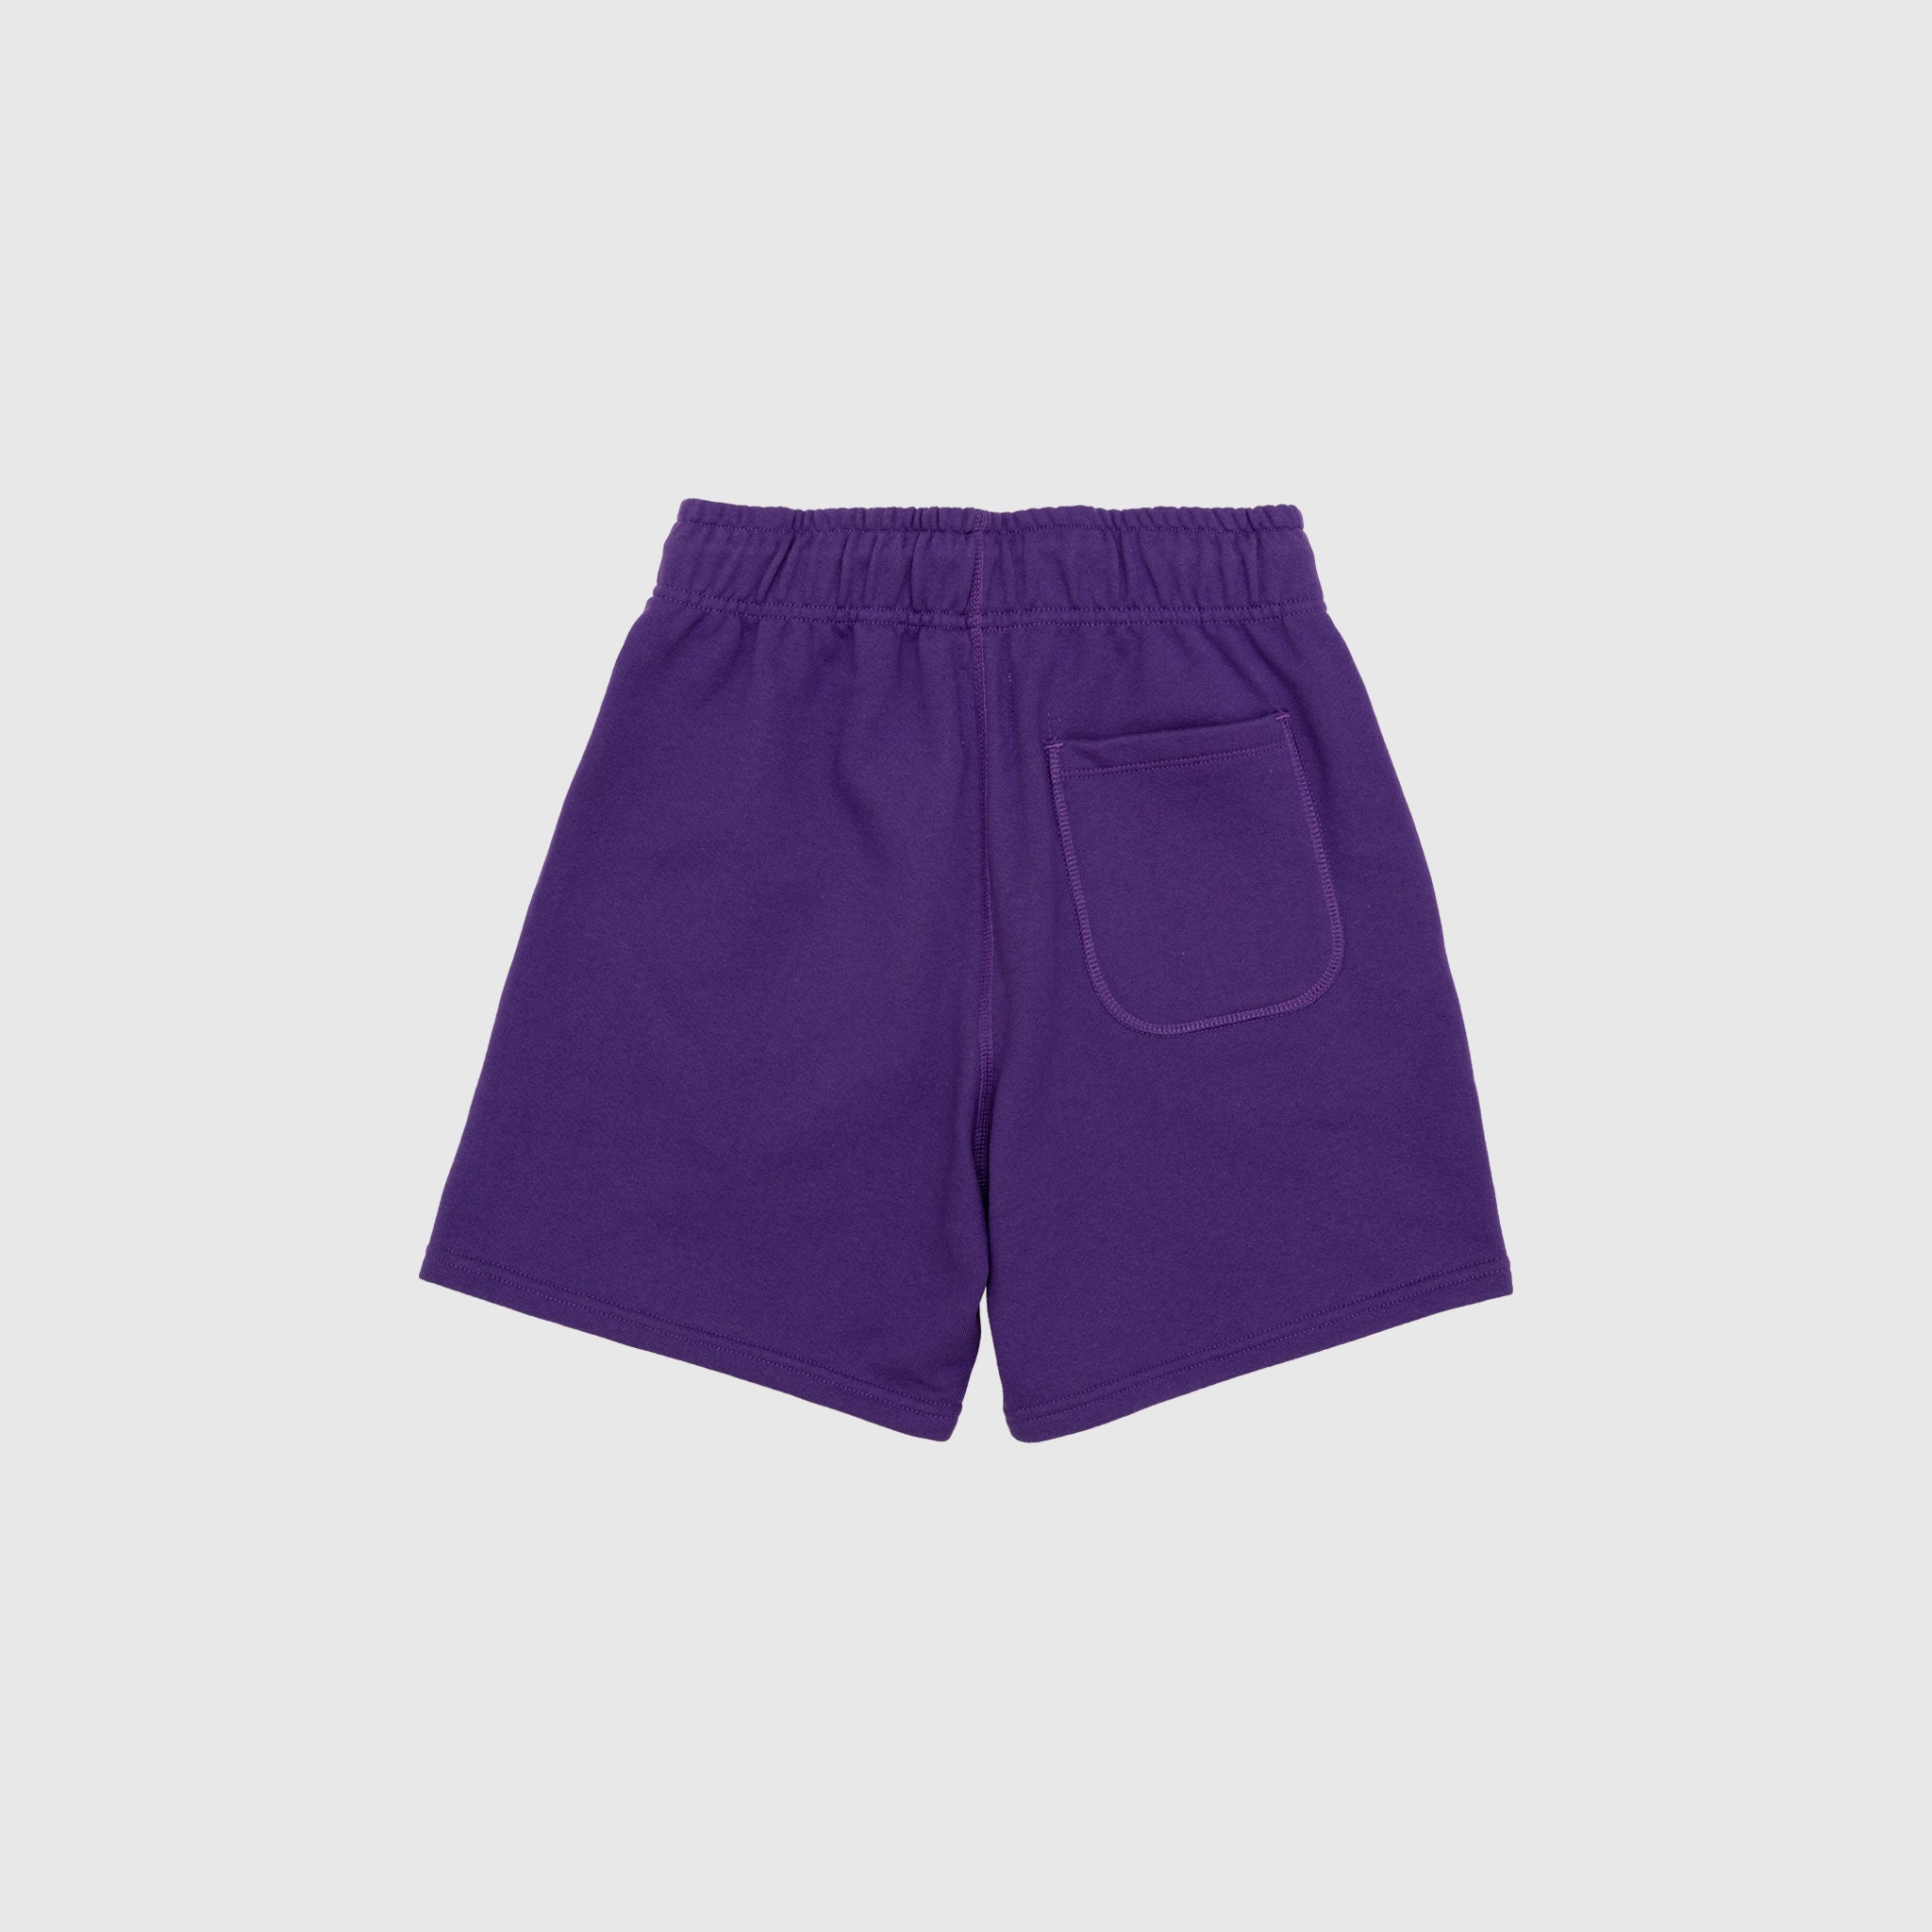 CORE SHORTS "MADE IN USA"